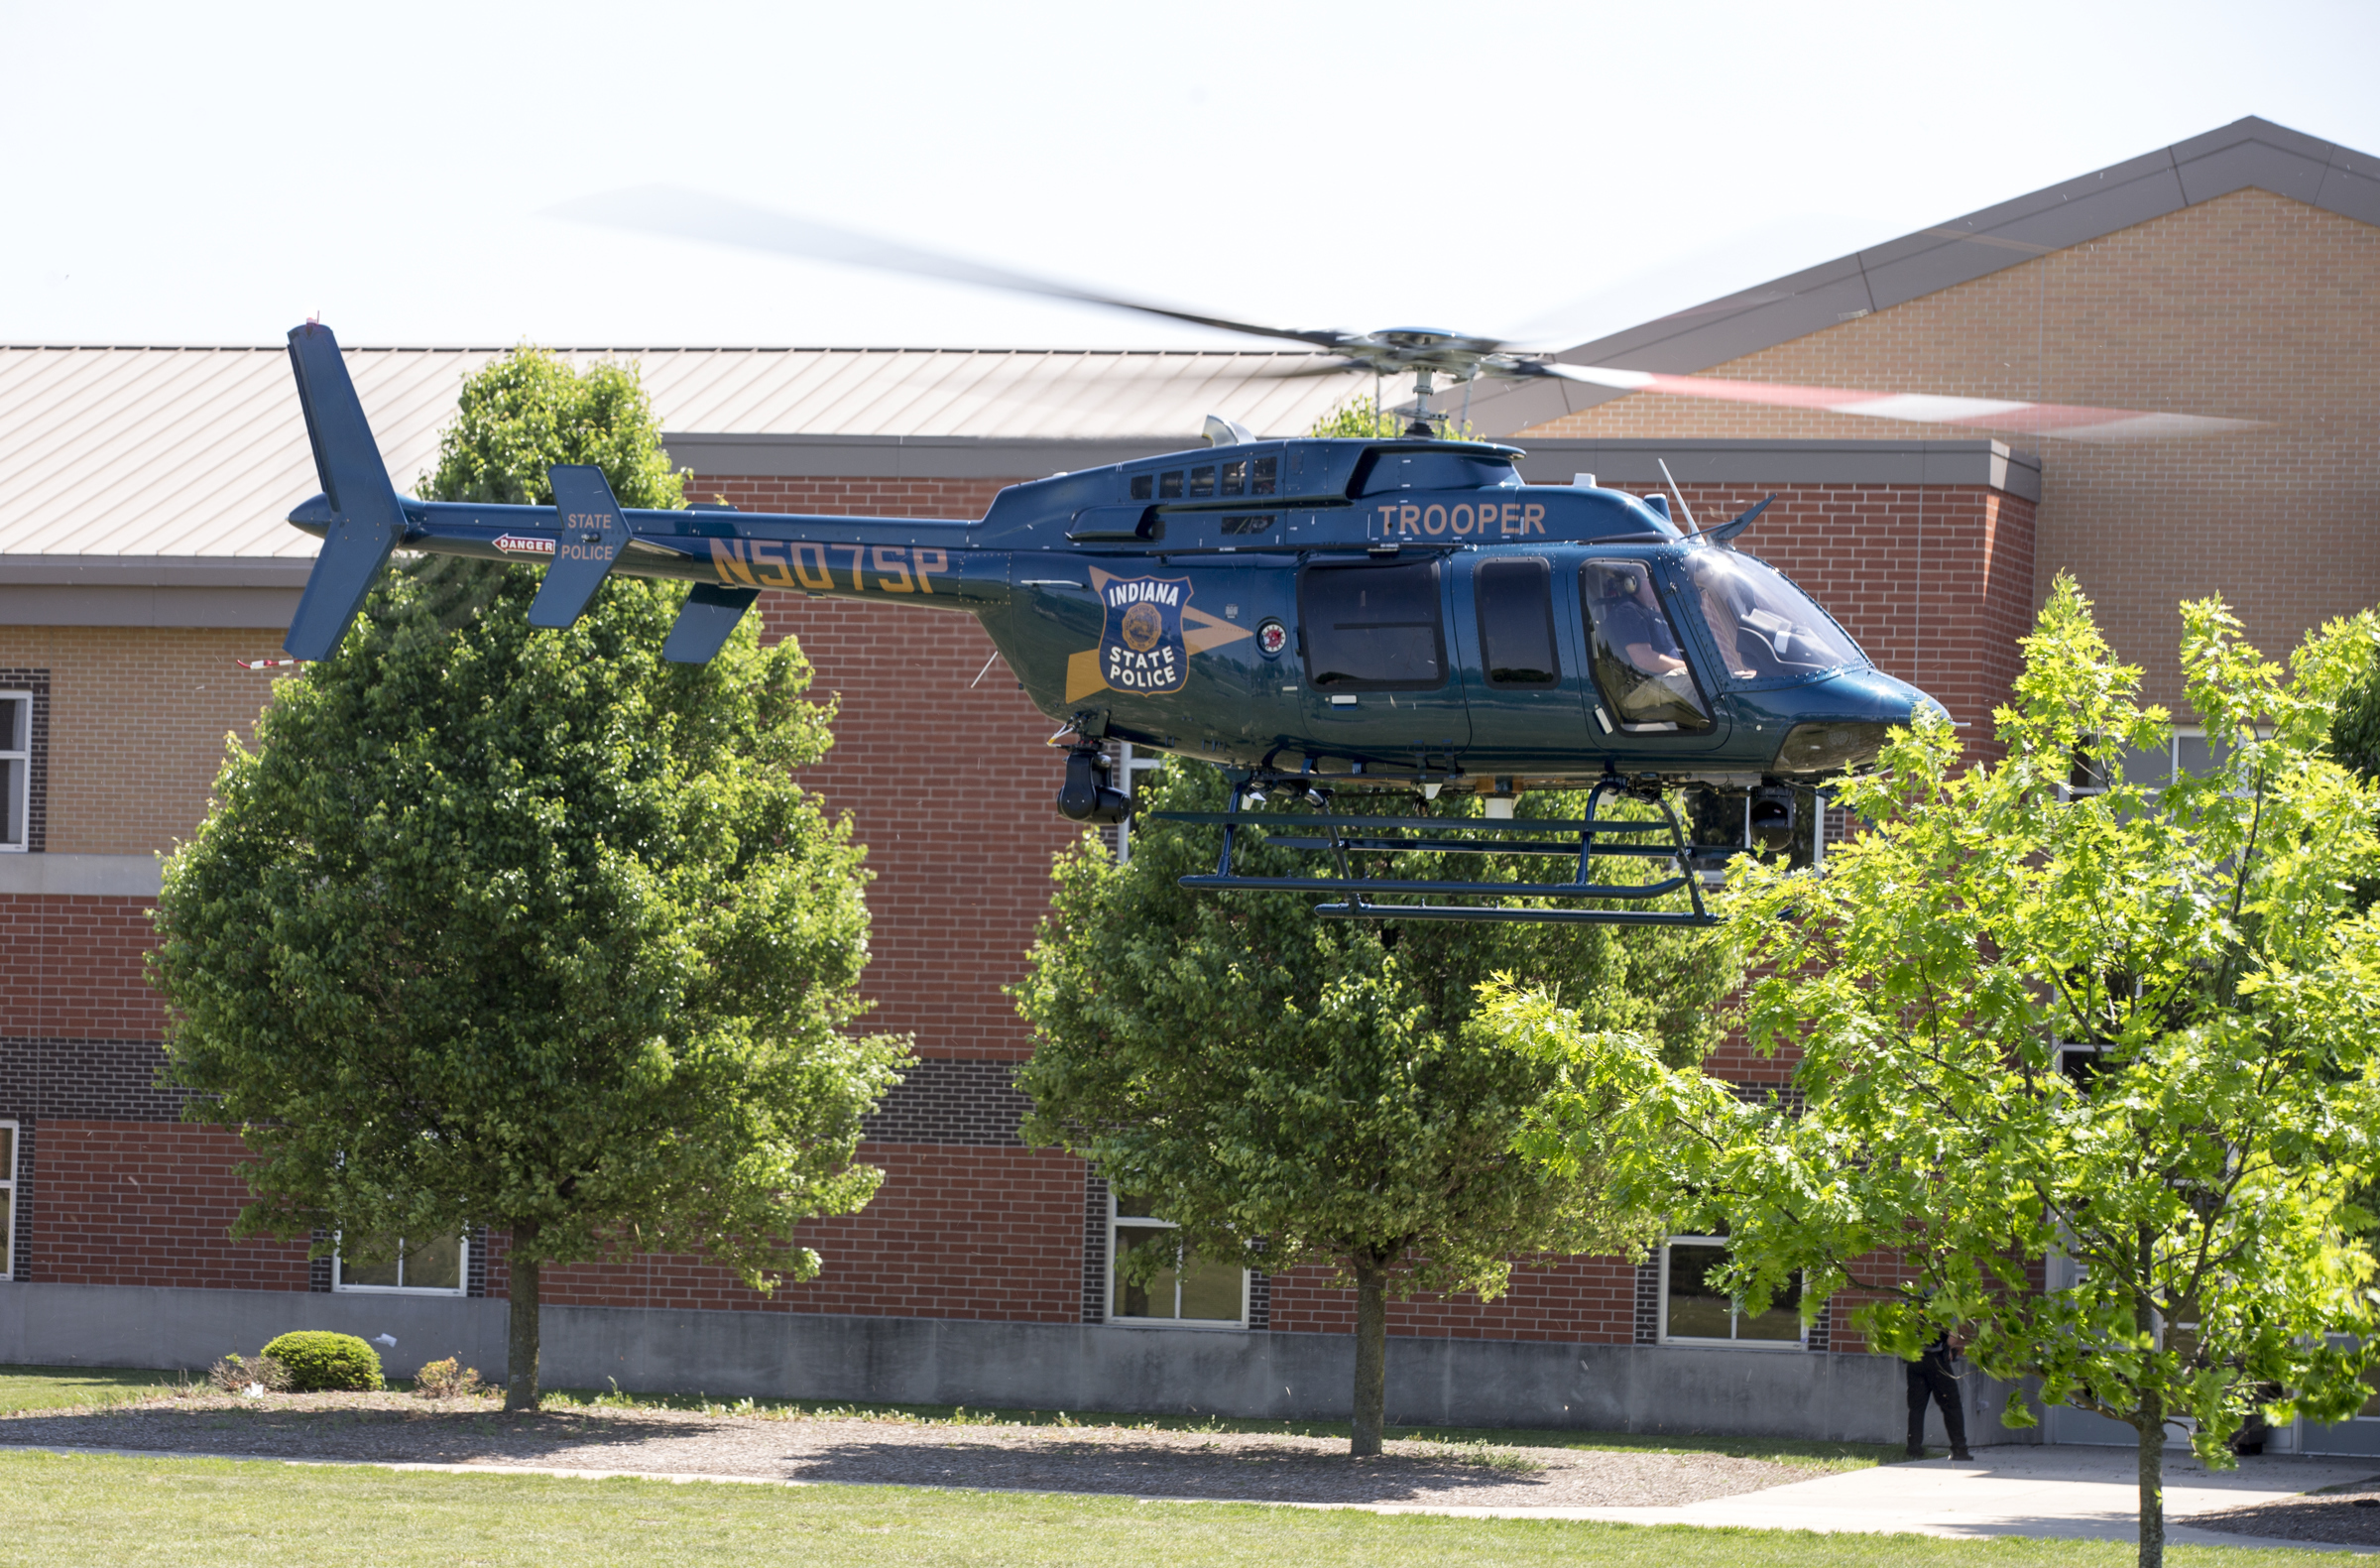 An Indiana State Police helicopter lifts off after a shooting at Noblesville West Middle School in Noblesville, Ind., on Friday, May 25, 2018. A male student opened fire at the suburban Indianapolis school wounding another student and a teacher before being taken into custody, authorities said. (Robert Scheer—AP)